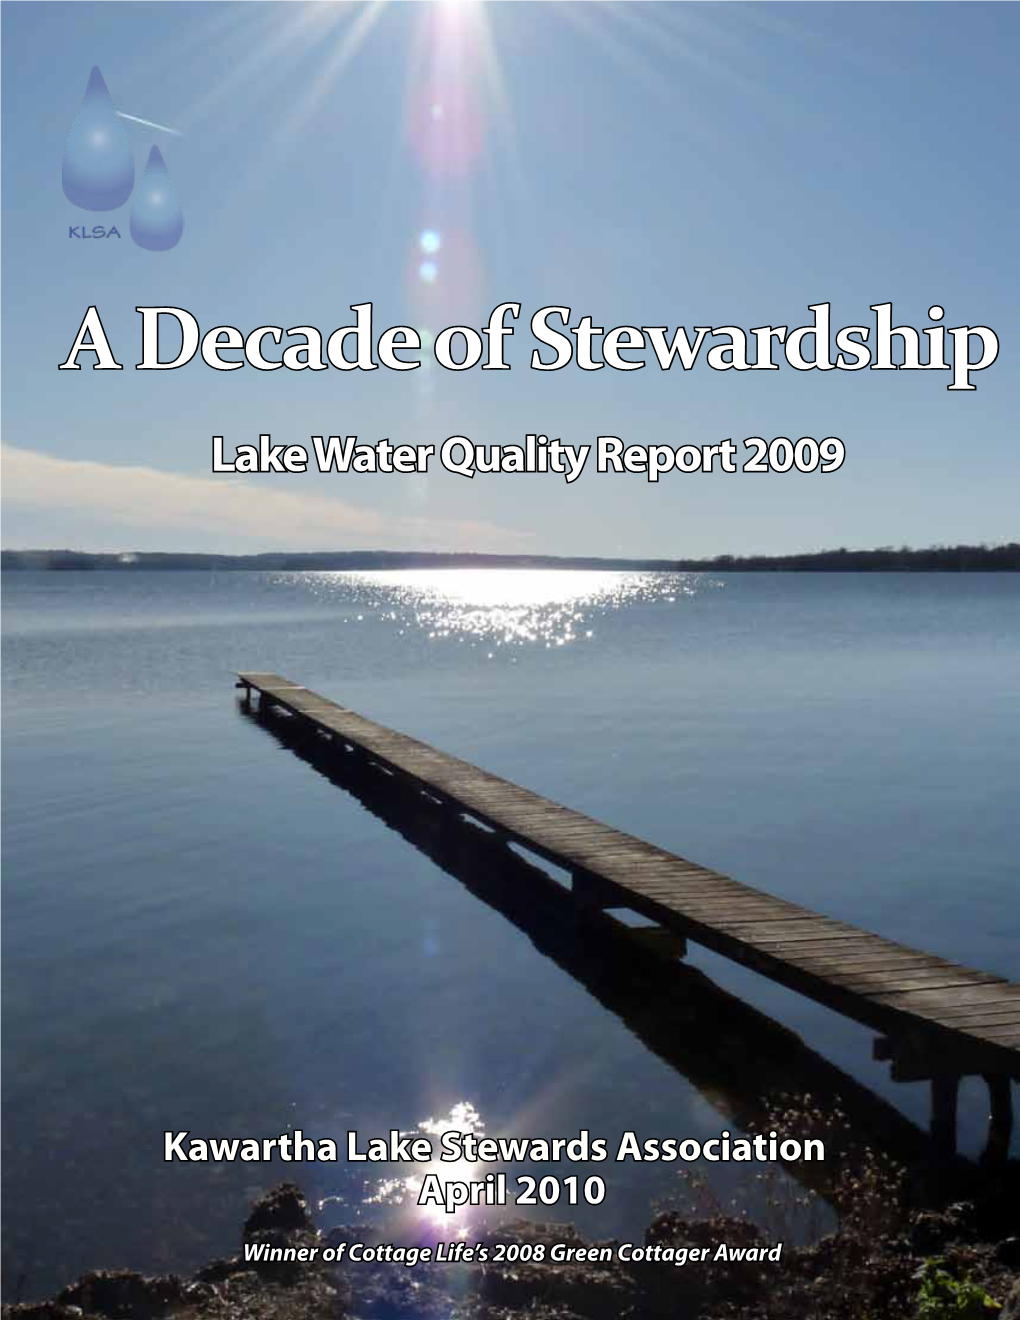 A Decade of Stewardship Lake Water Quality Report 2009